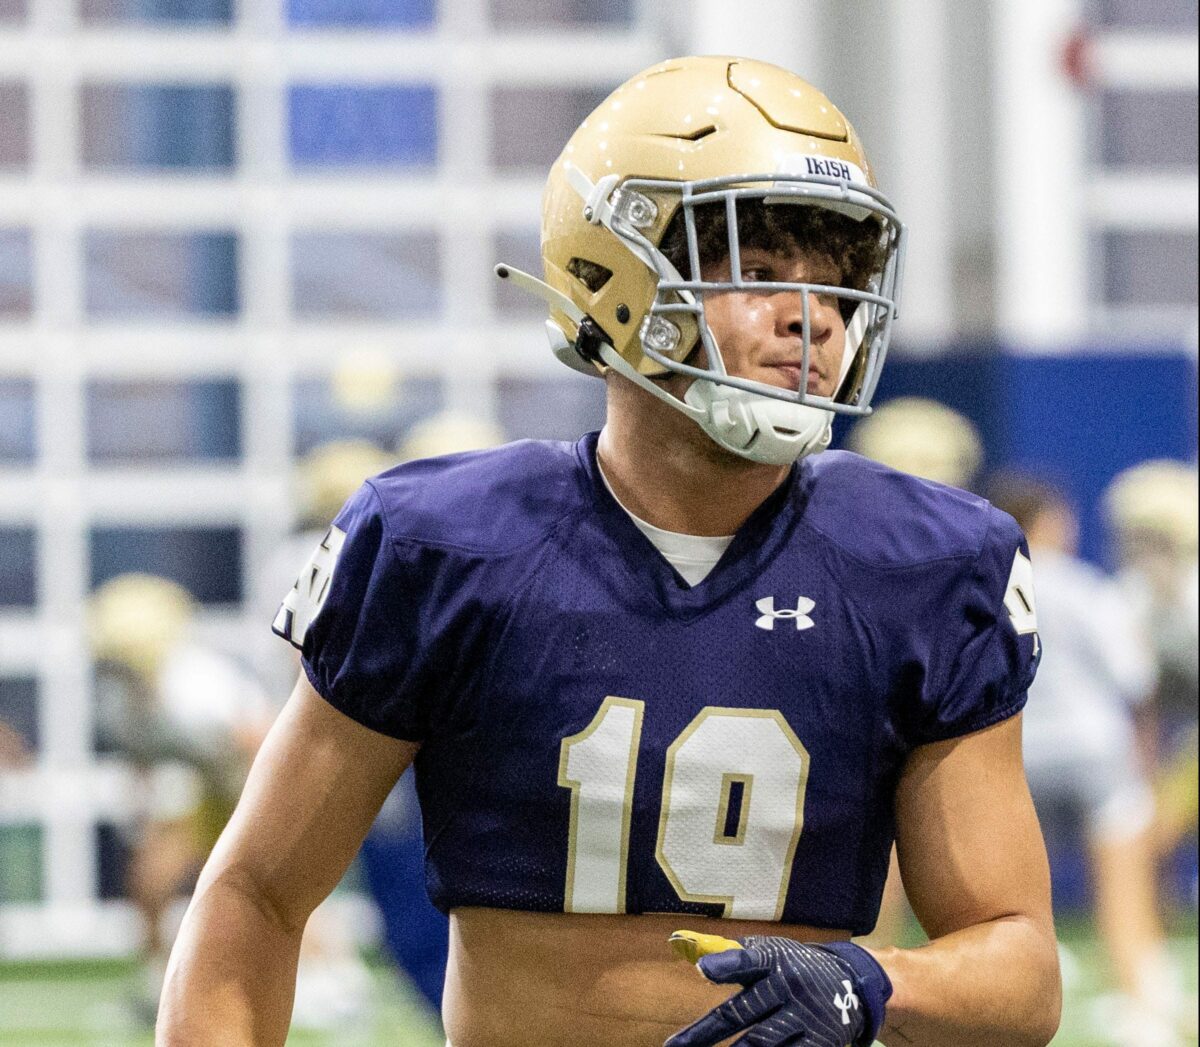 247Sports has one Notre Dame player on its preseason freshman All-American team